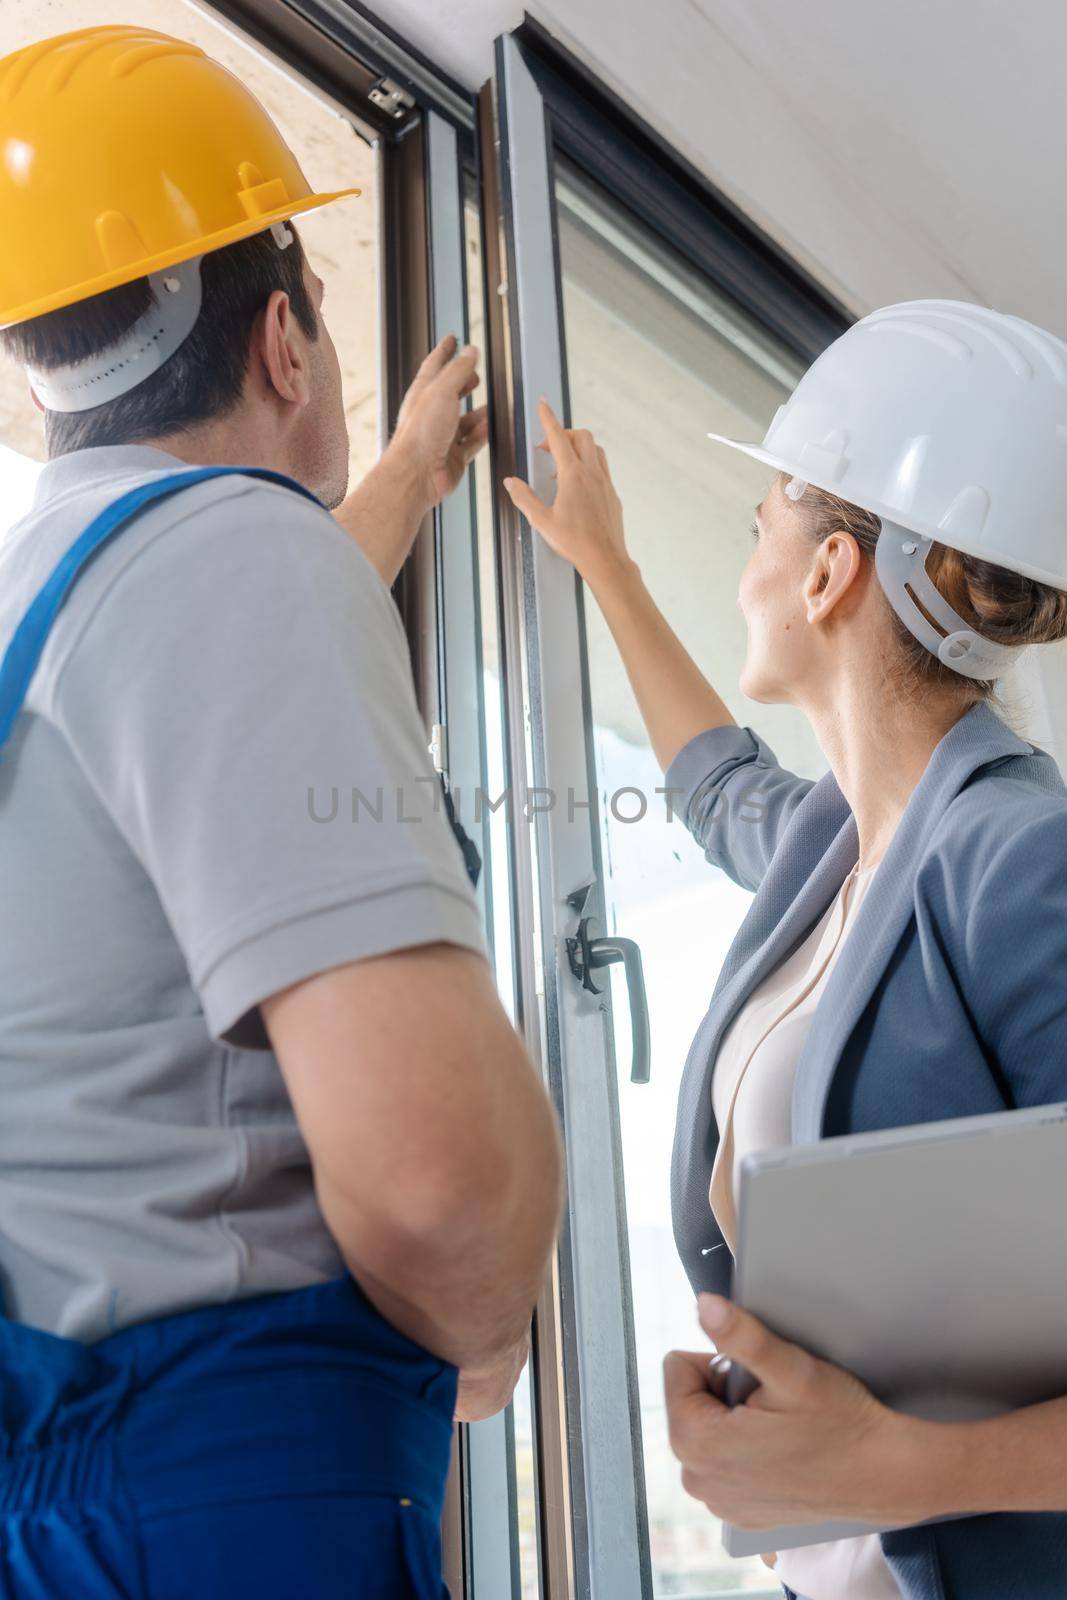 Architect and construction worker checking windows on site by Kzenon